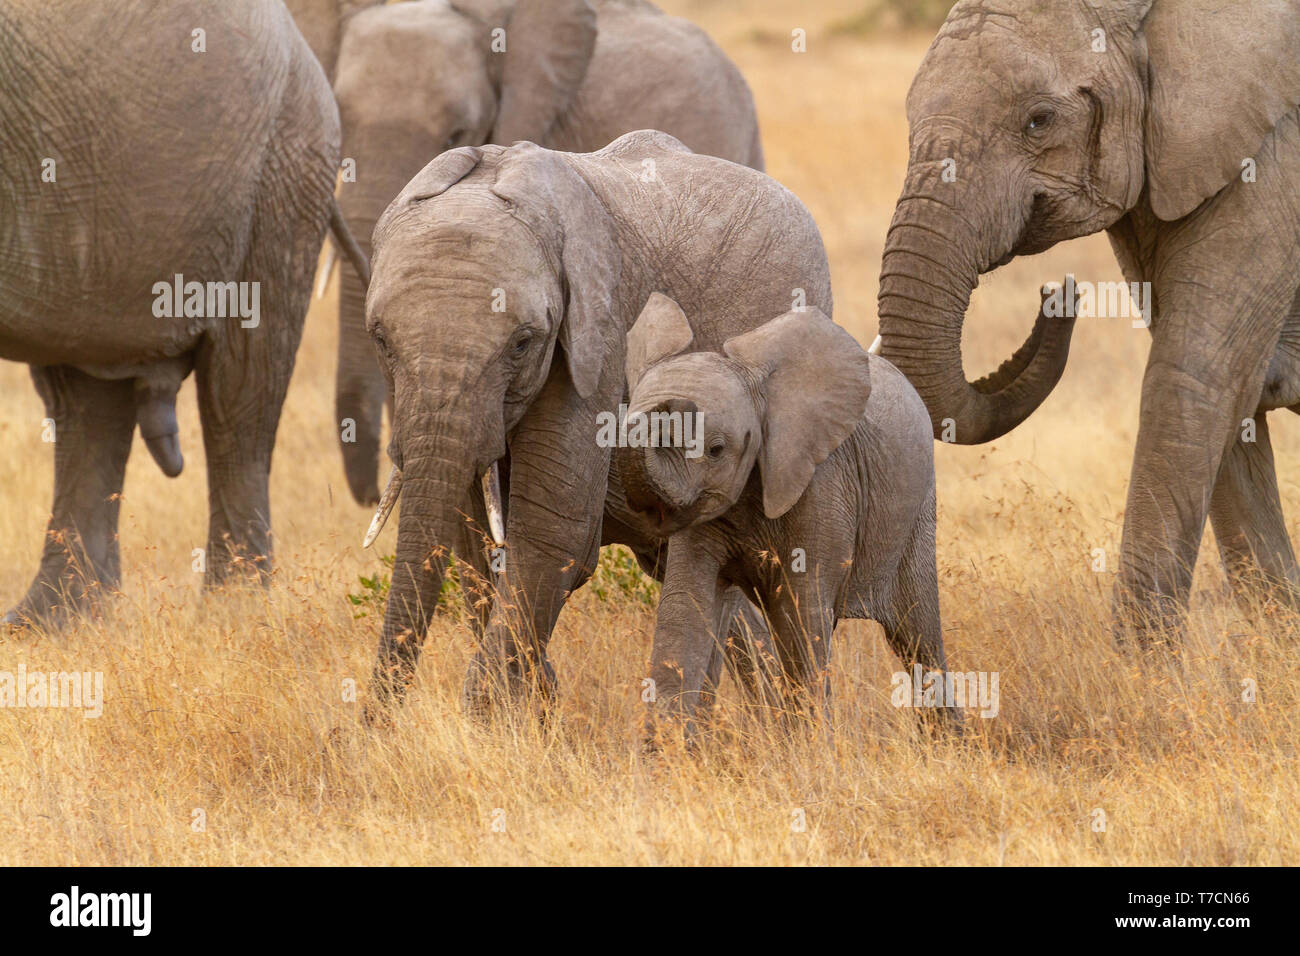 Two cute baby elephant calves Loxodonta africana curling trunk in dry golden grass Ol Pejeta Conservancy Kenya East Africa temporal gland streaming Stock Photo